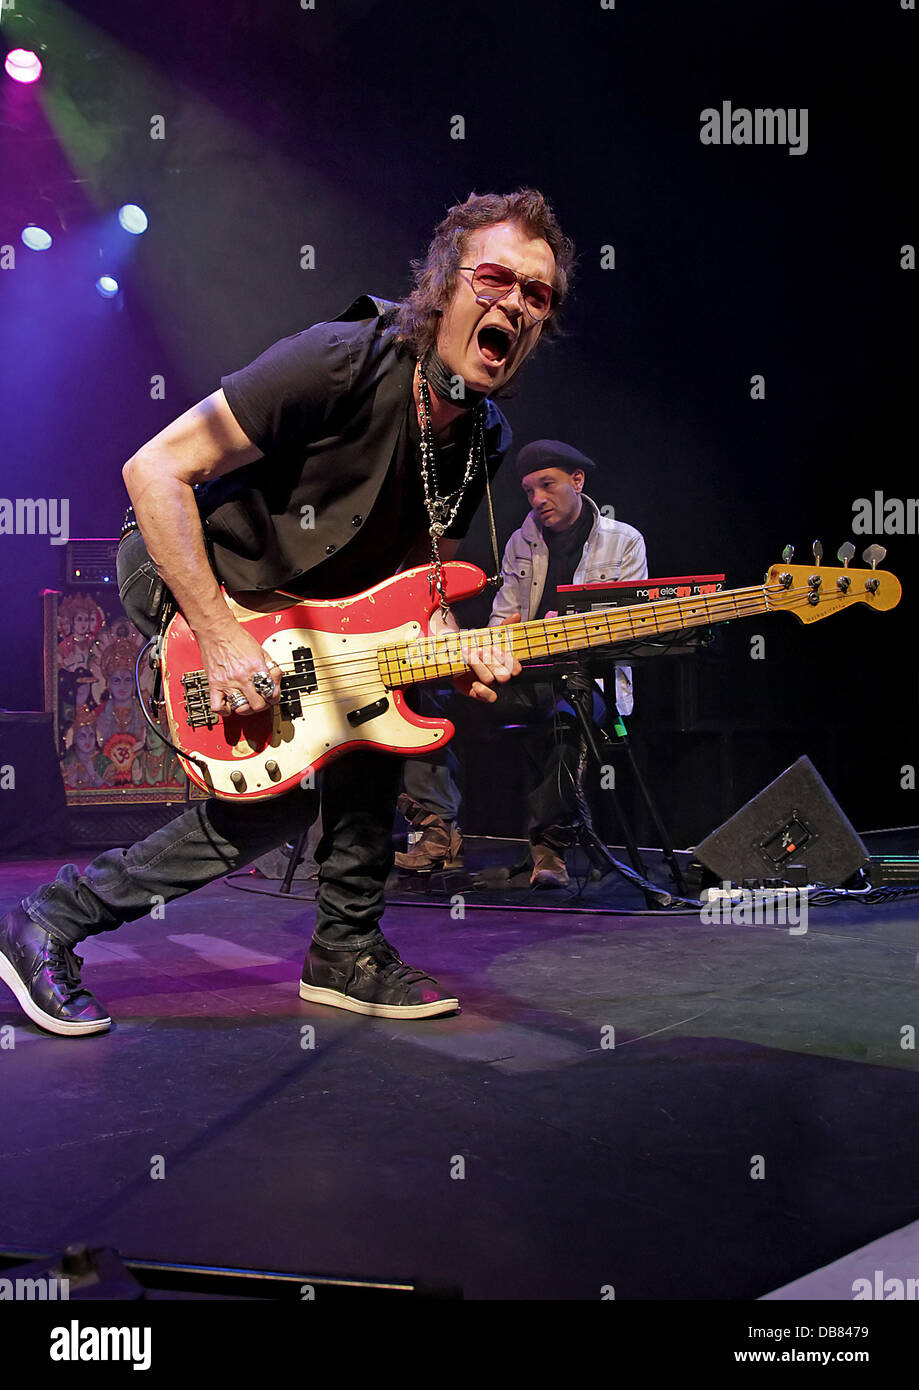 Former Deep Purple bass player Glenn Hughes, now of Black Country Communion, performs on stage at Pacific Road Arts Centre. Birkenhead, England - 17.05.11 Stock Photo